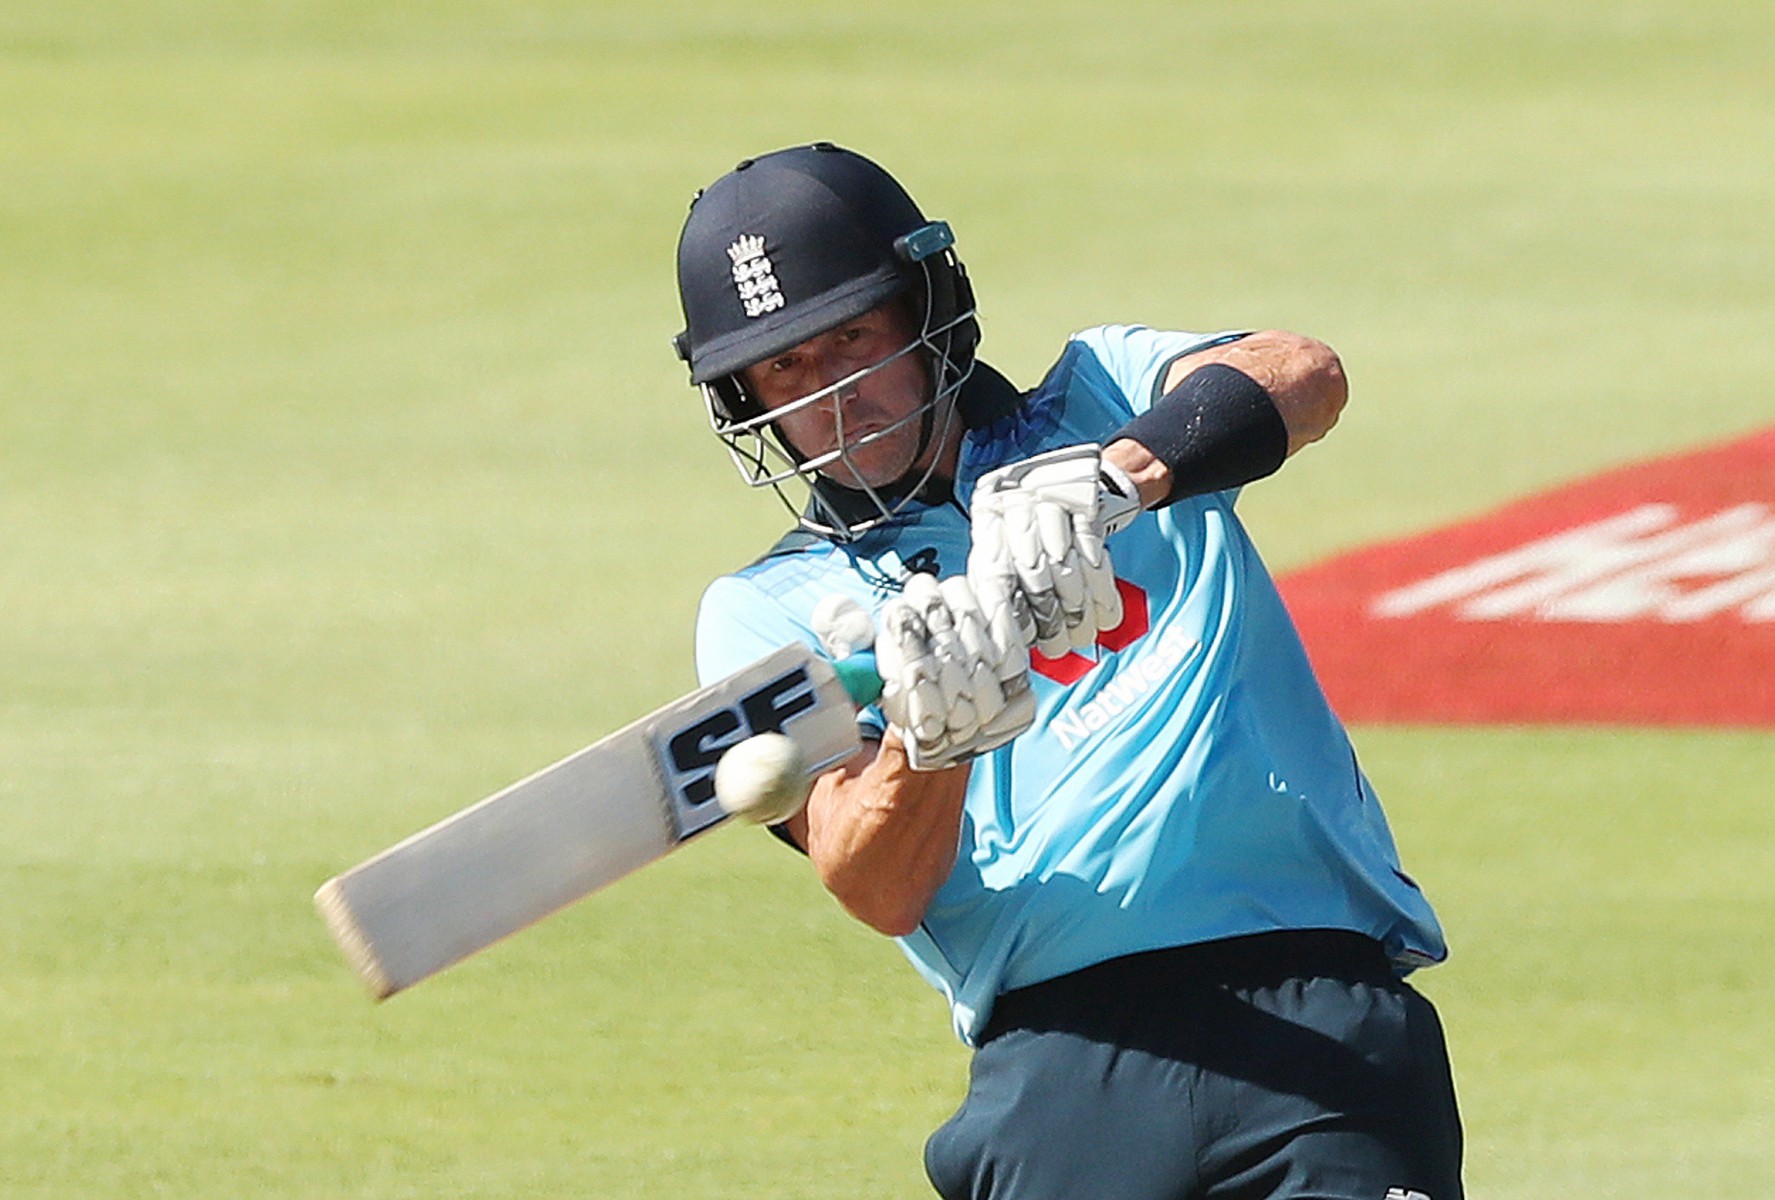 Joe Denly gave the england innings some respectability with 87 off 103 deliveries